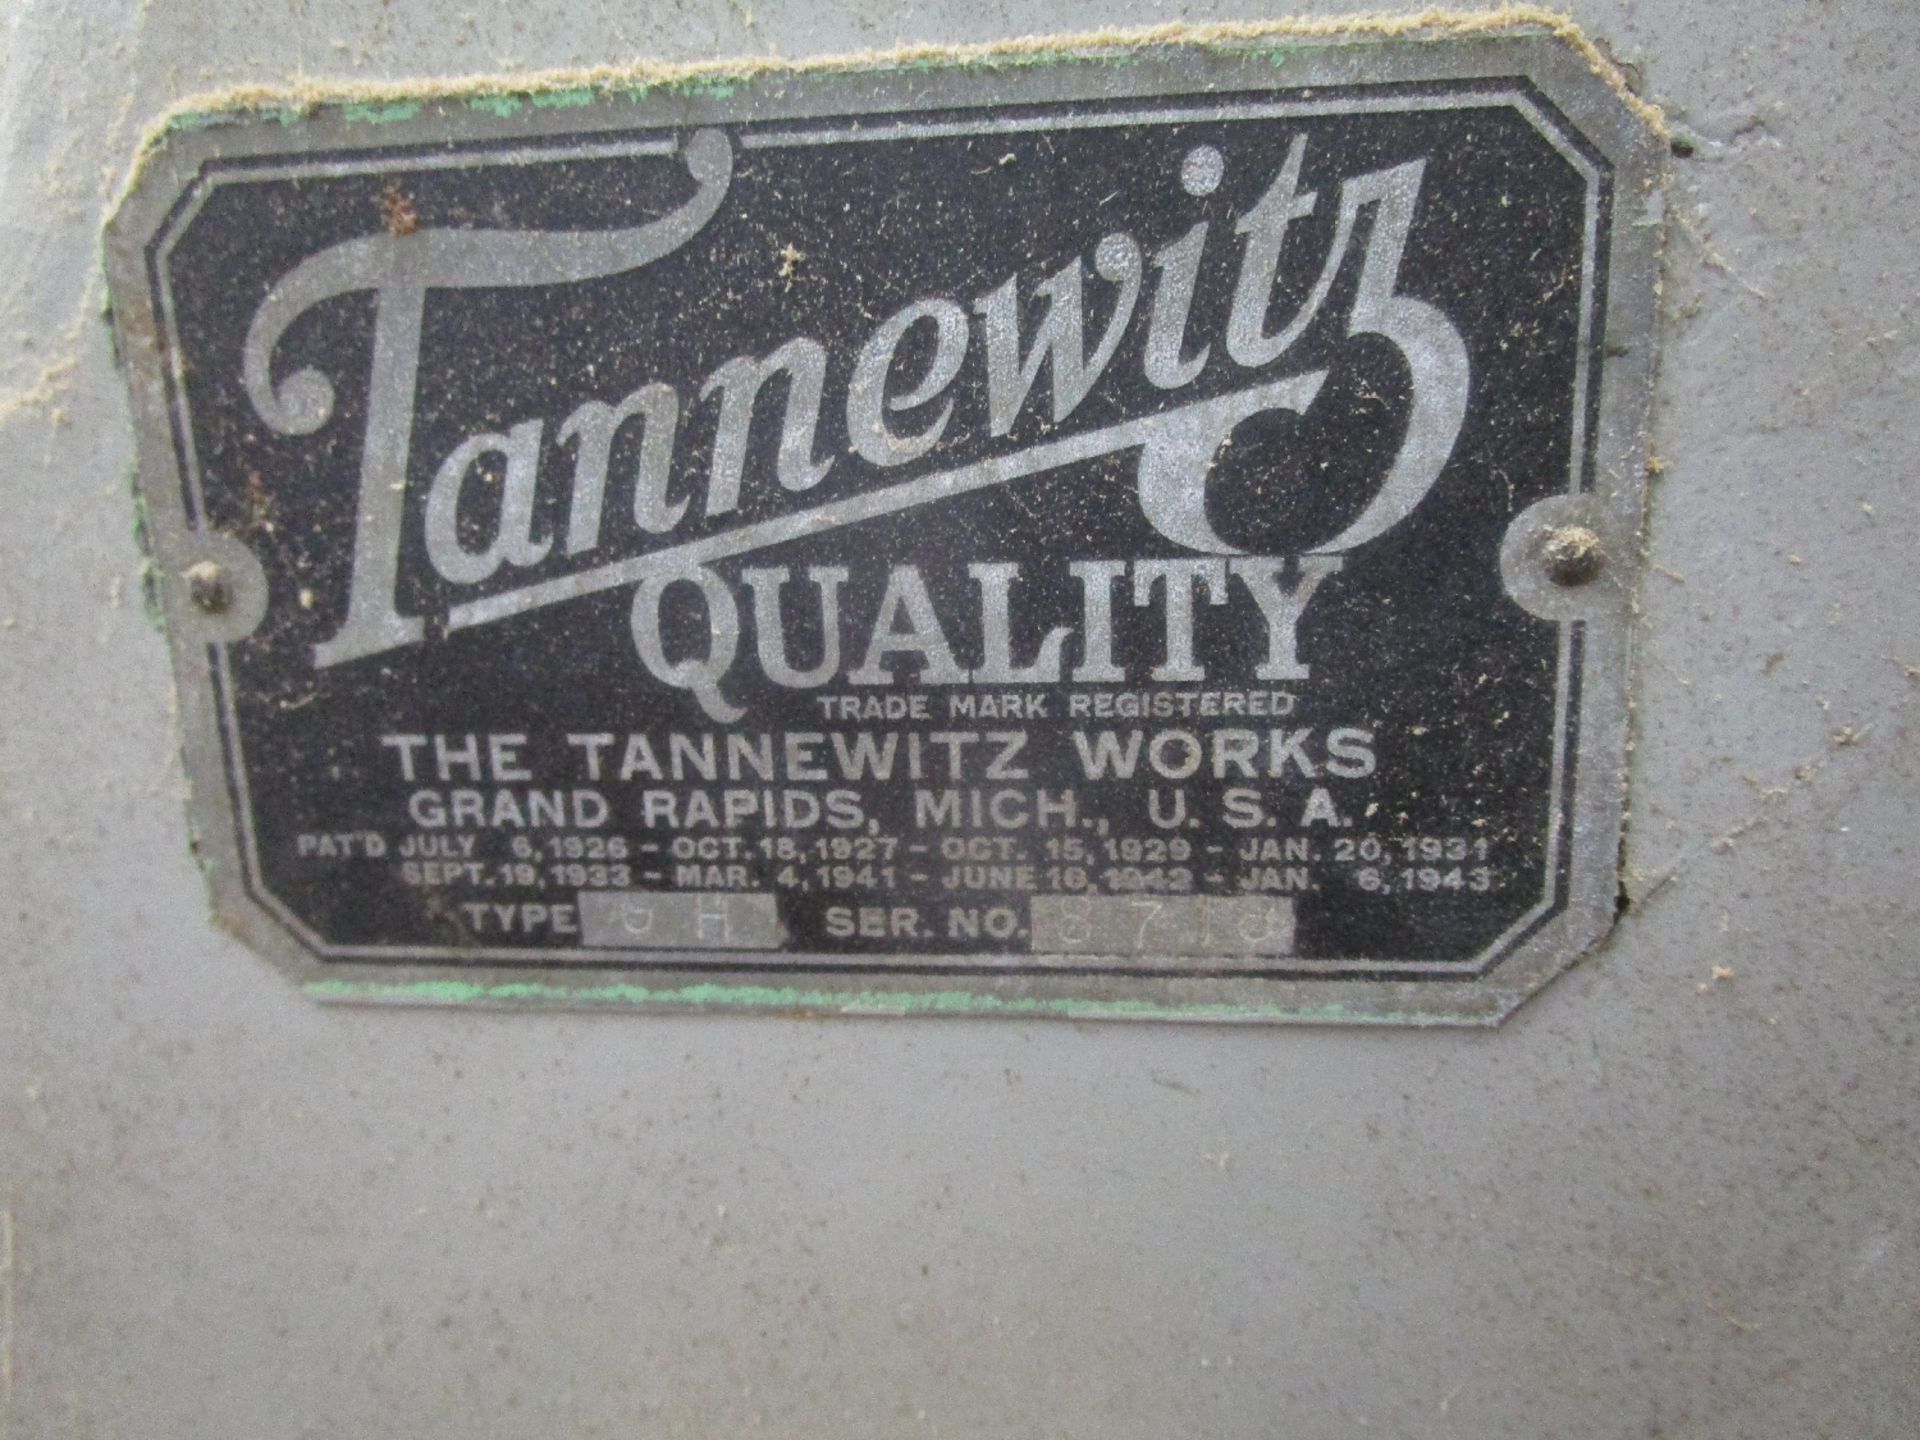 Tannewitz GH Vertical Bandsaw - Image 3 of 3